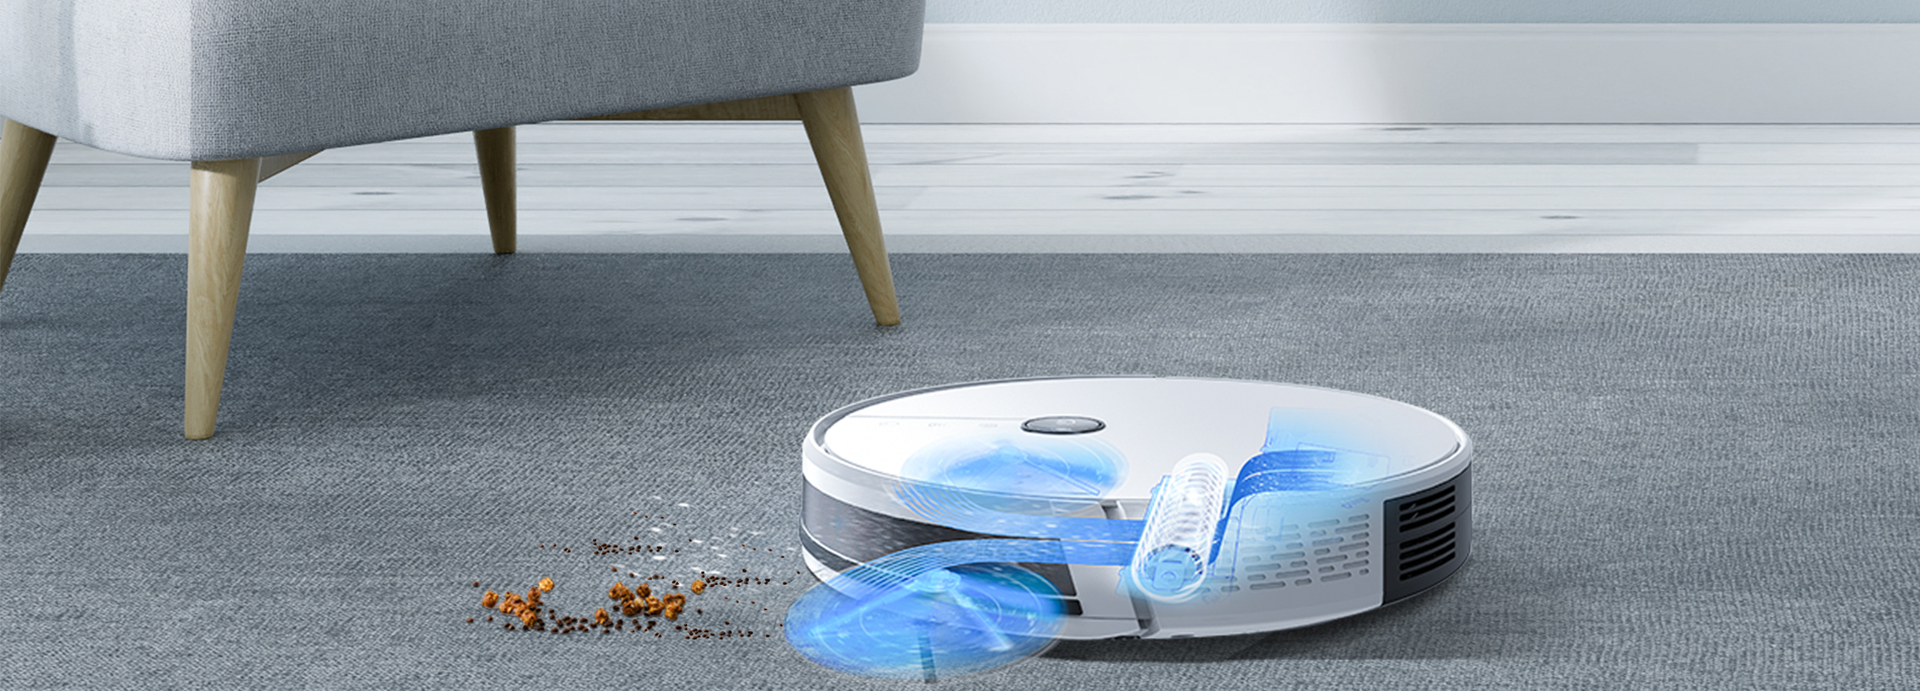 Automatic Floor Cleaning Robot Video